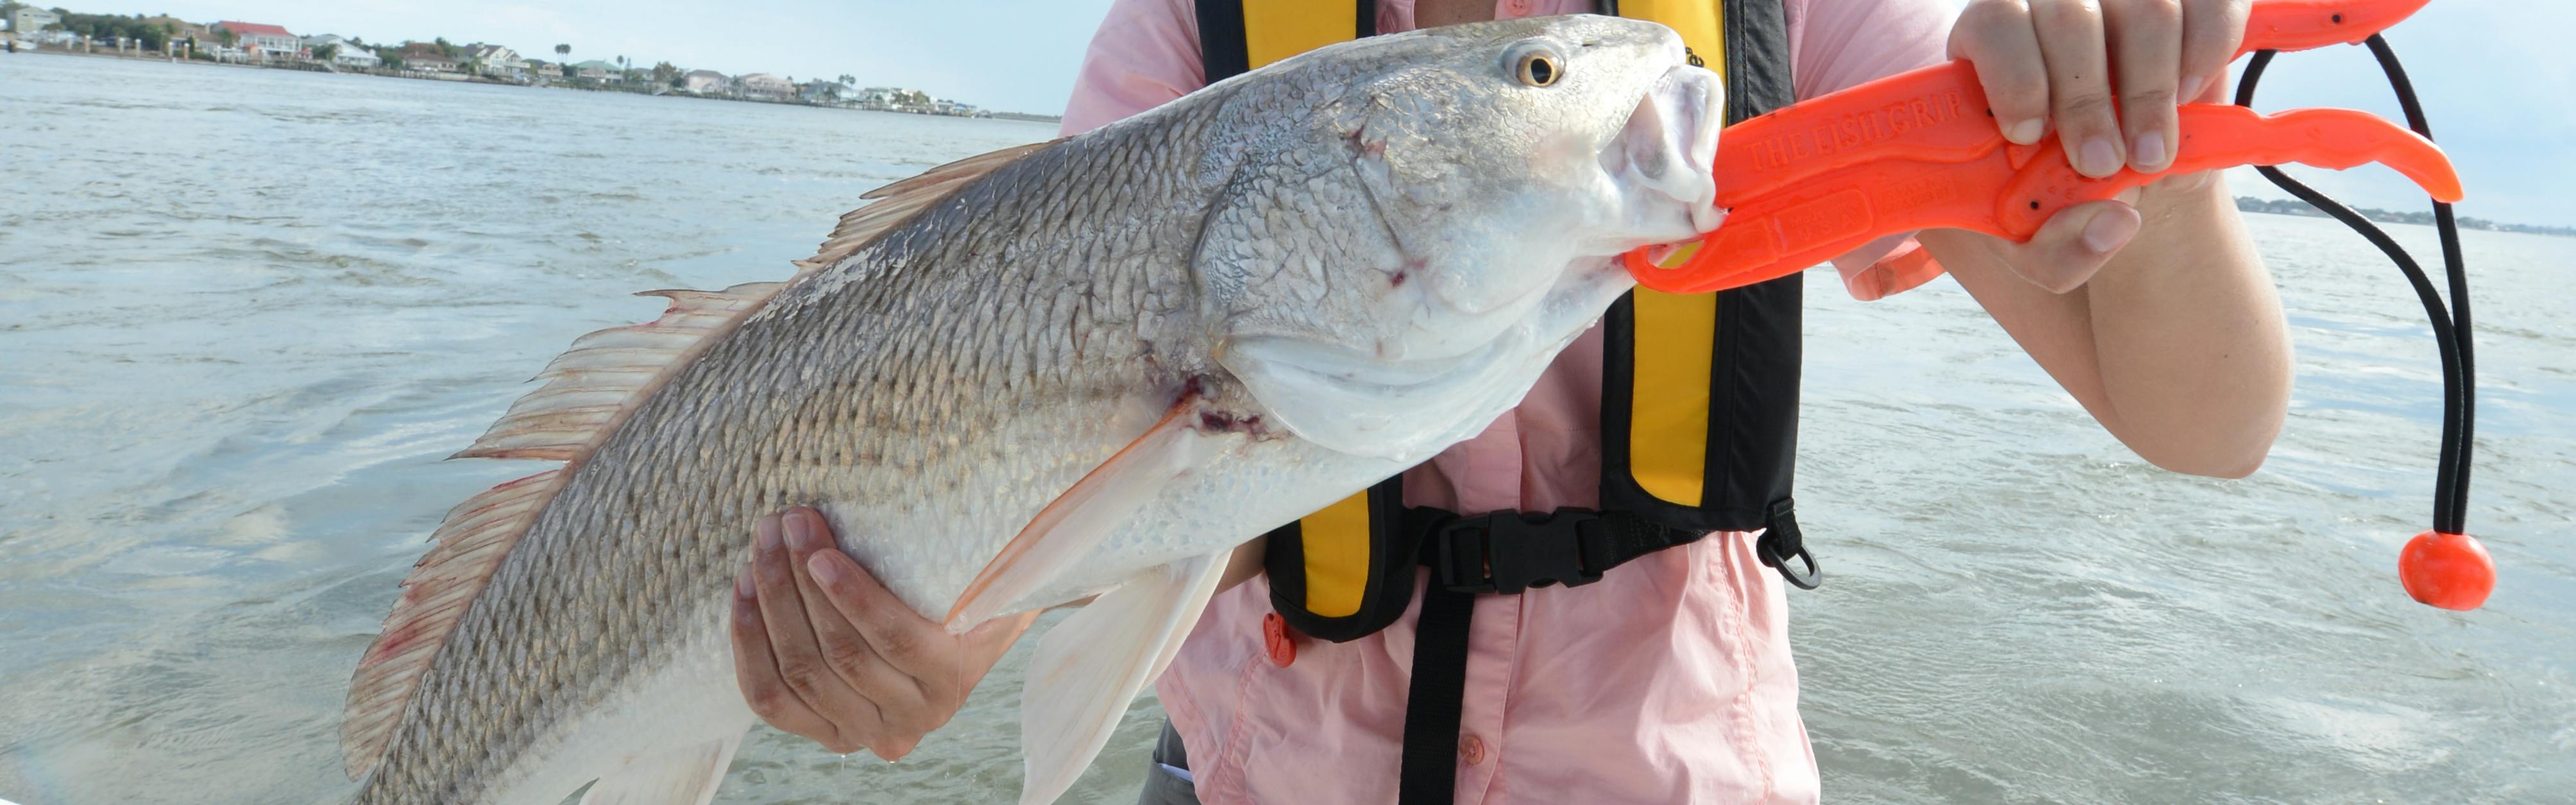 Salty Scales - Extreme Fishing Apparel & Gear  Fishing outfits, Saltwater  fishing gear, Fish